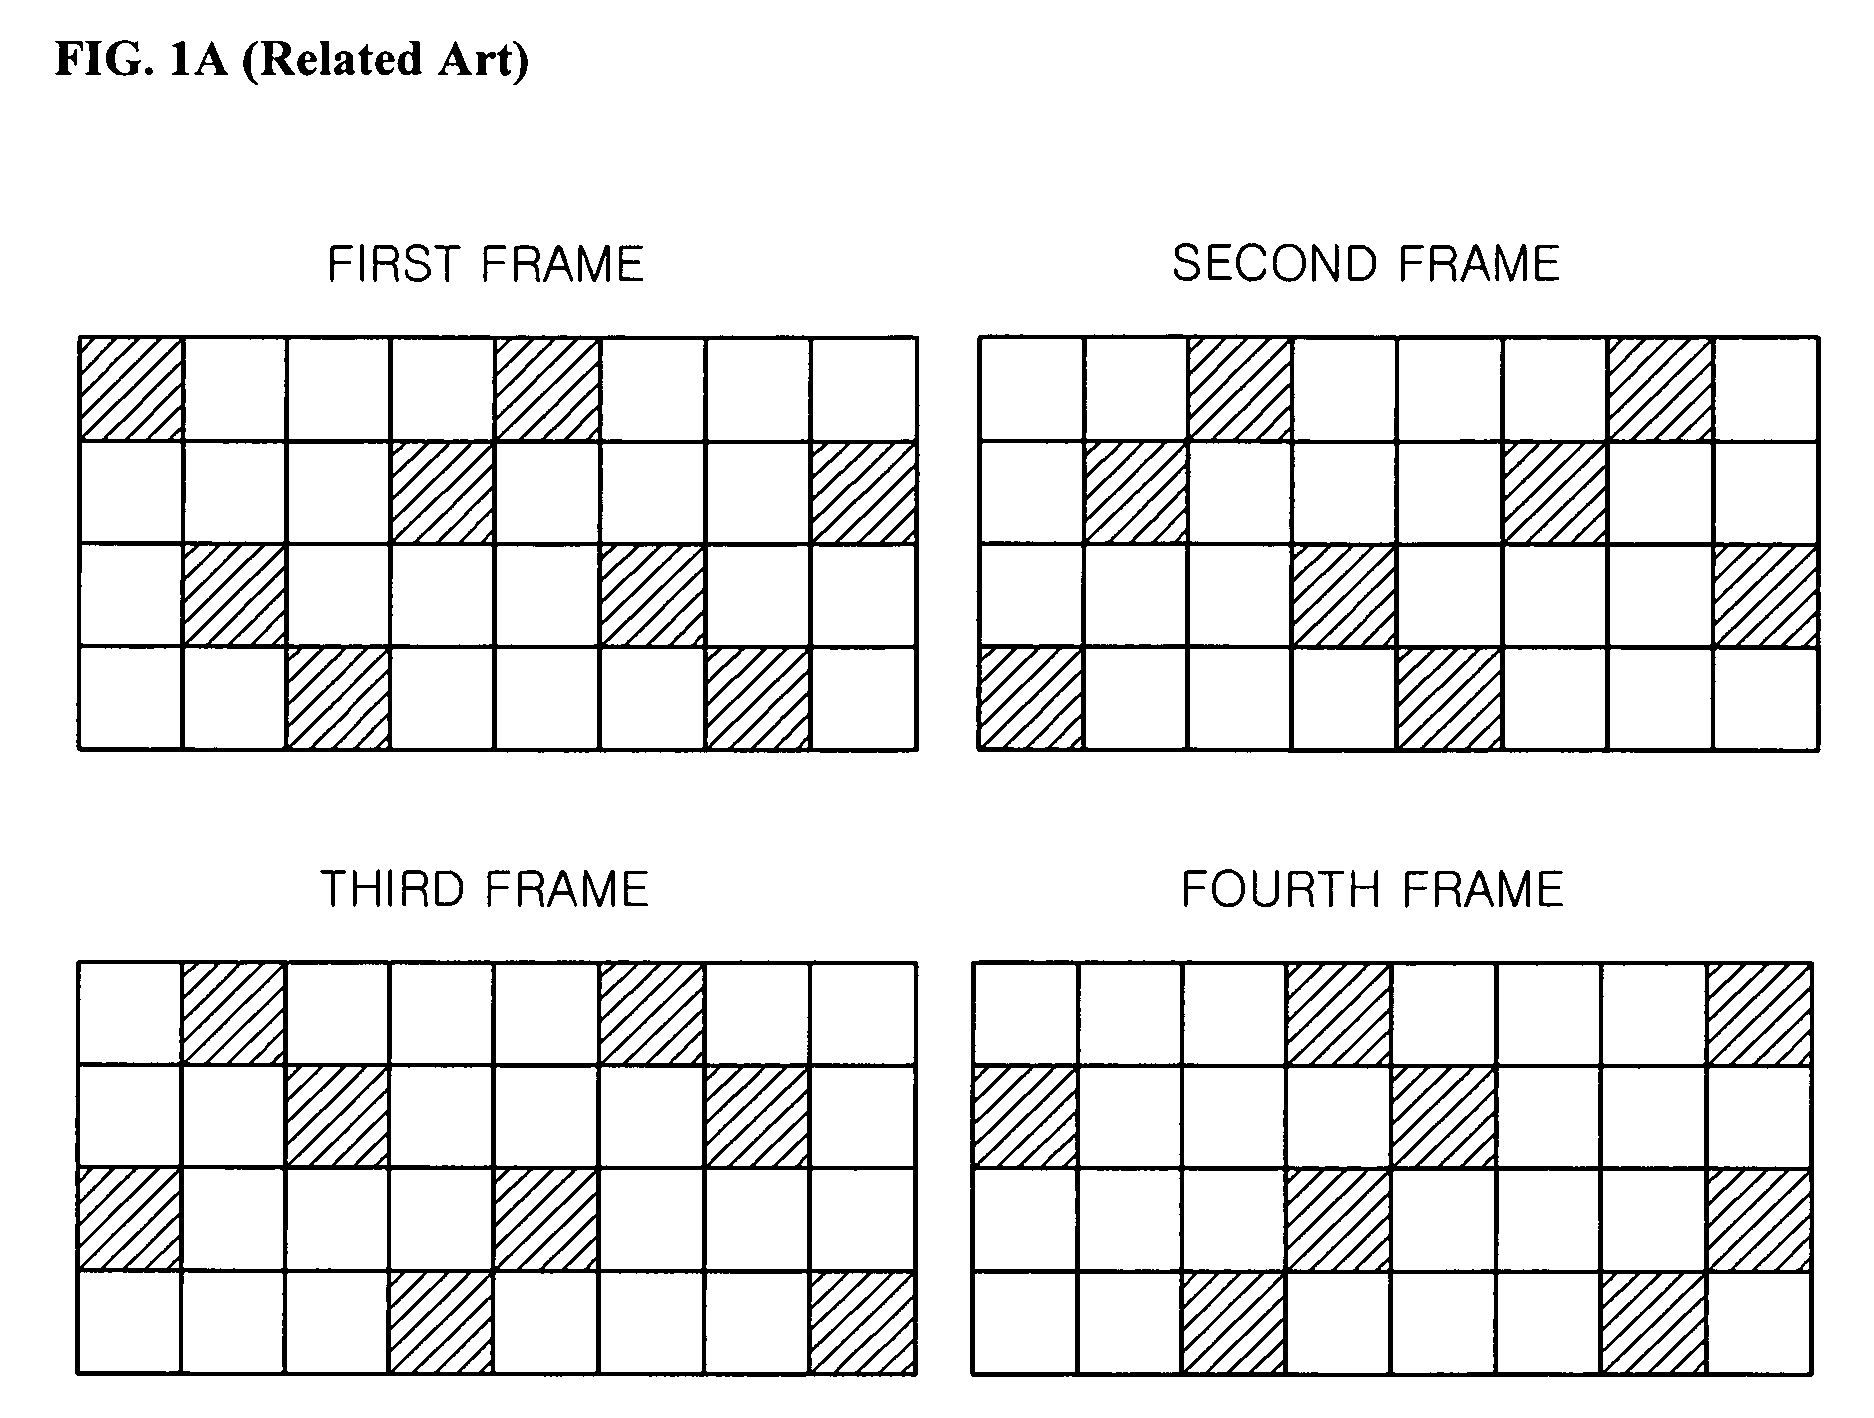 Unit and method of controlling frame rate and liquid crystal display device using the same